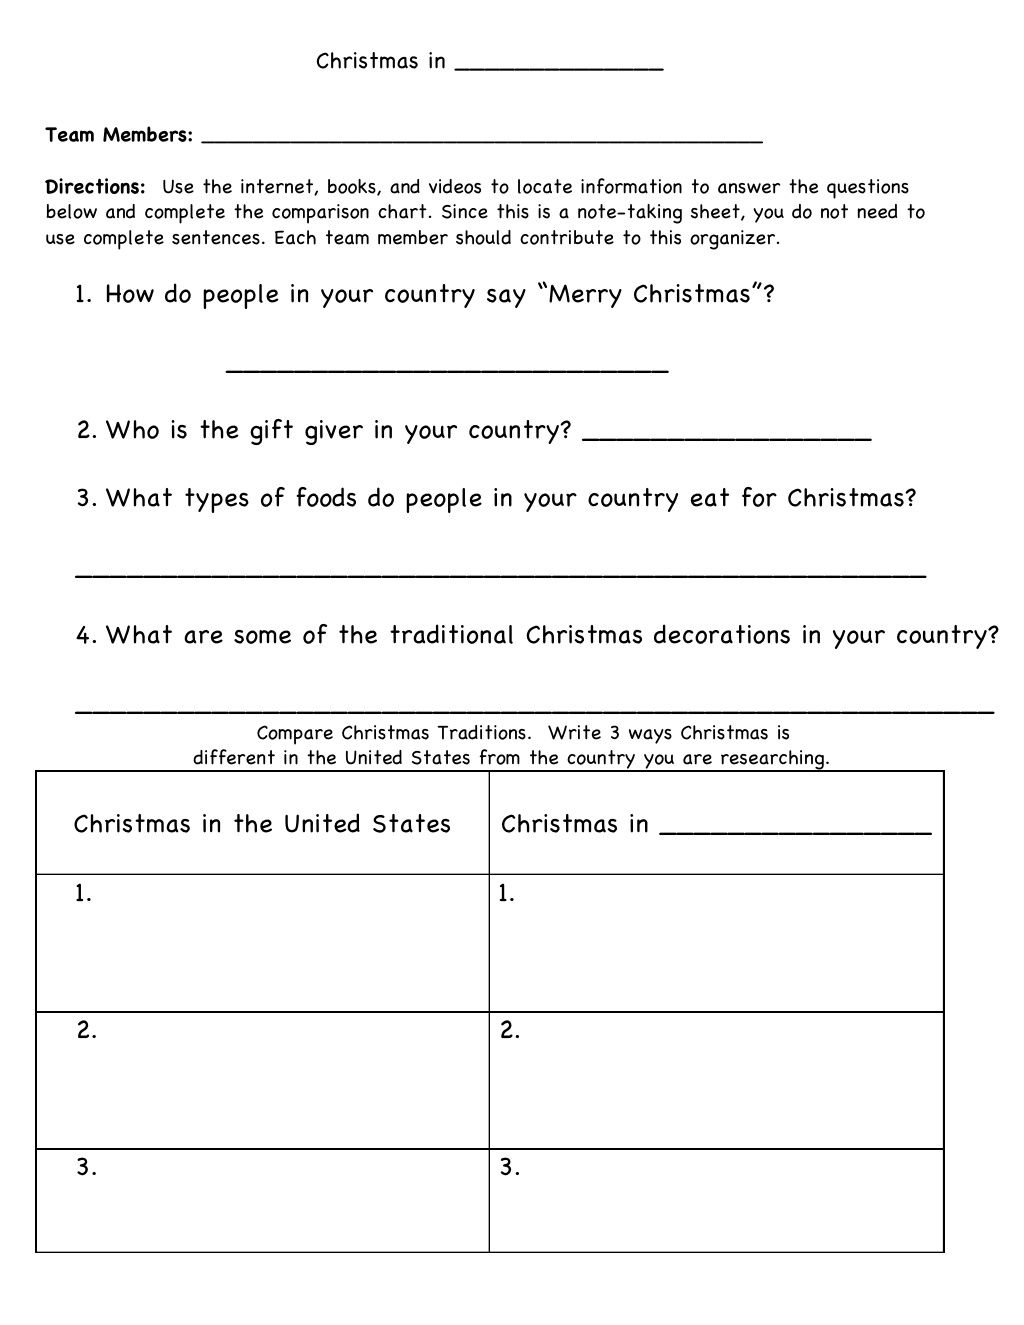 Christmas Around The World Research Graphic Organizer (By